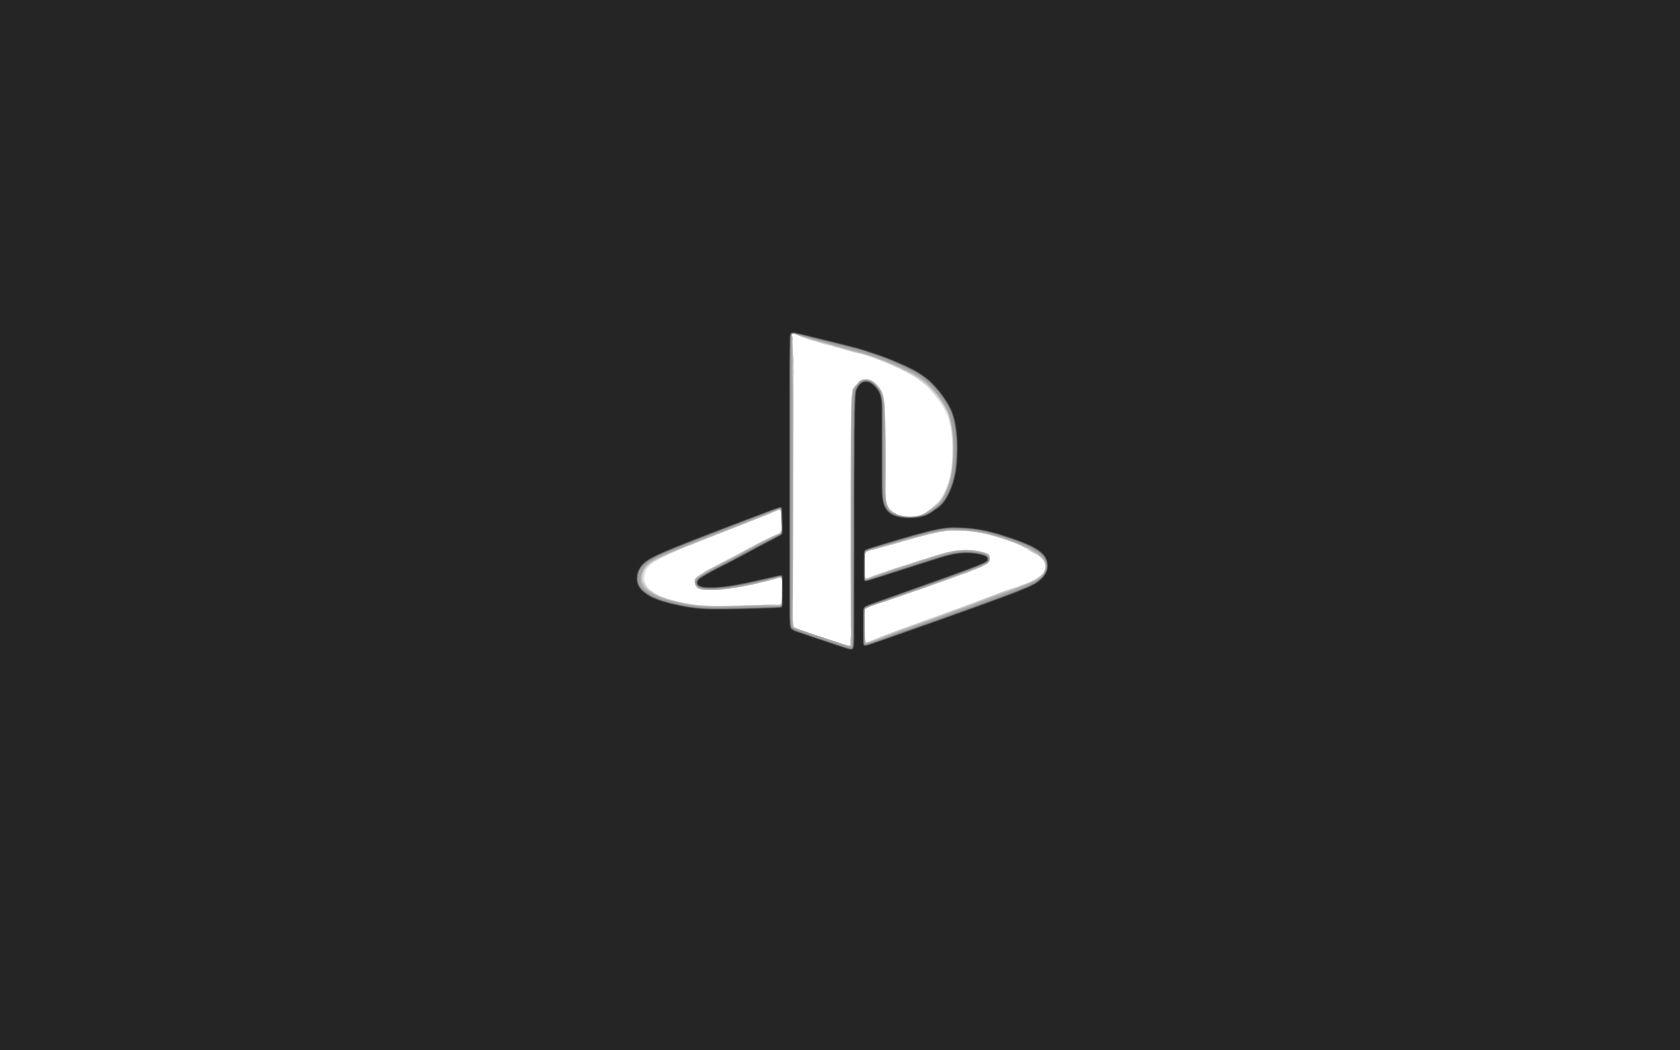 Playstation 4 Logo Wallpapers Top Free Playstation 4 Logo Backgrounds Wallpaperaccess